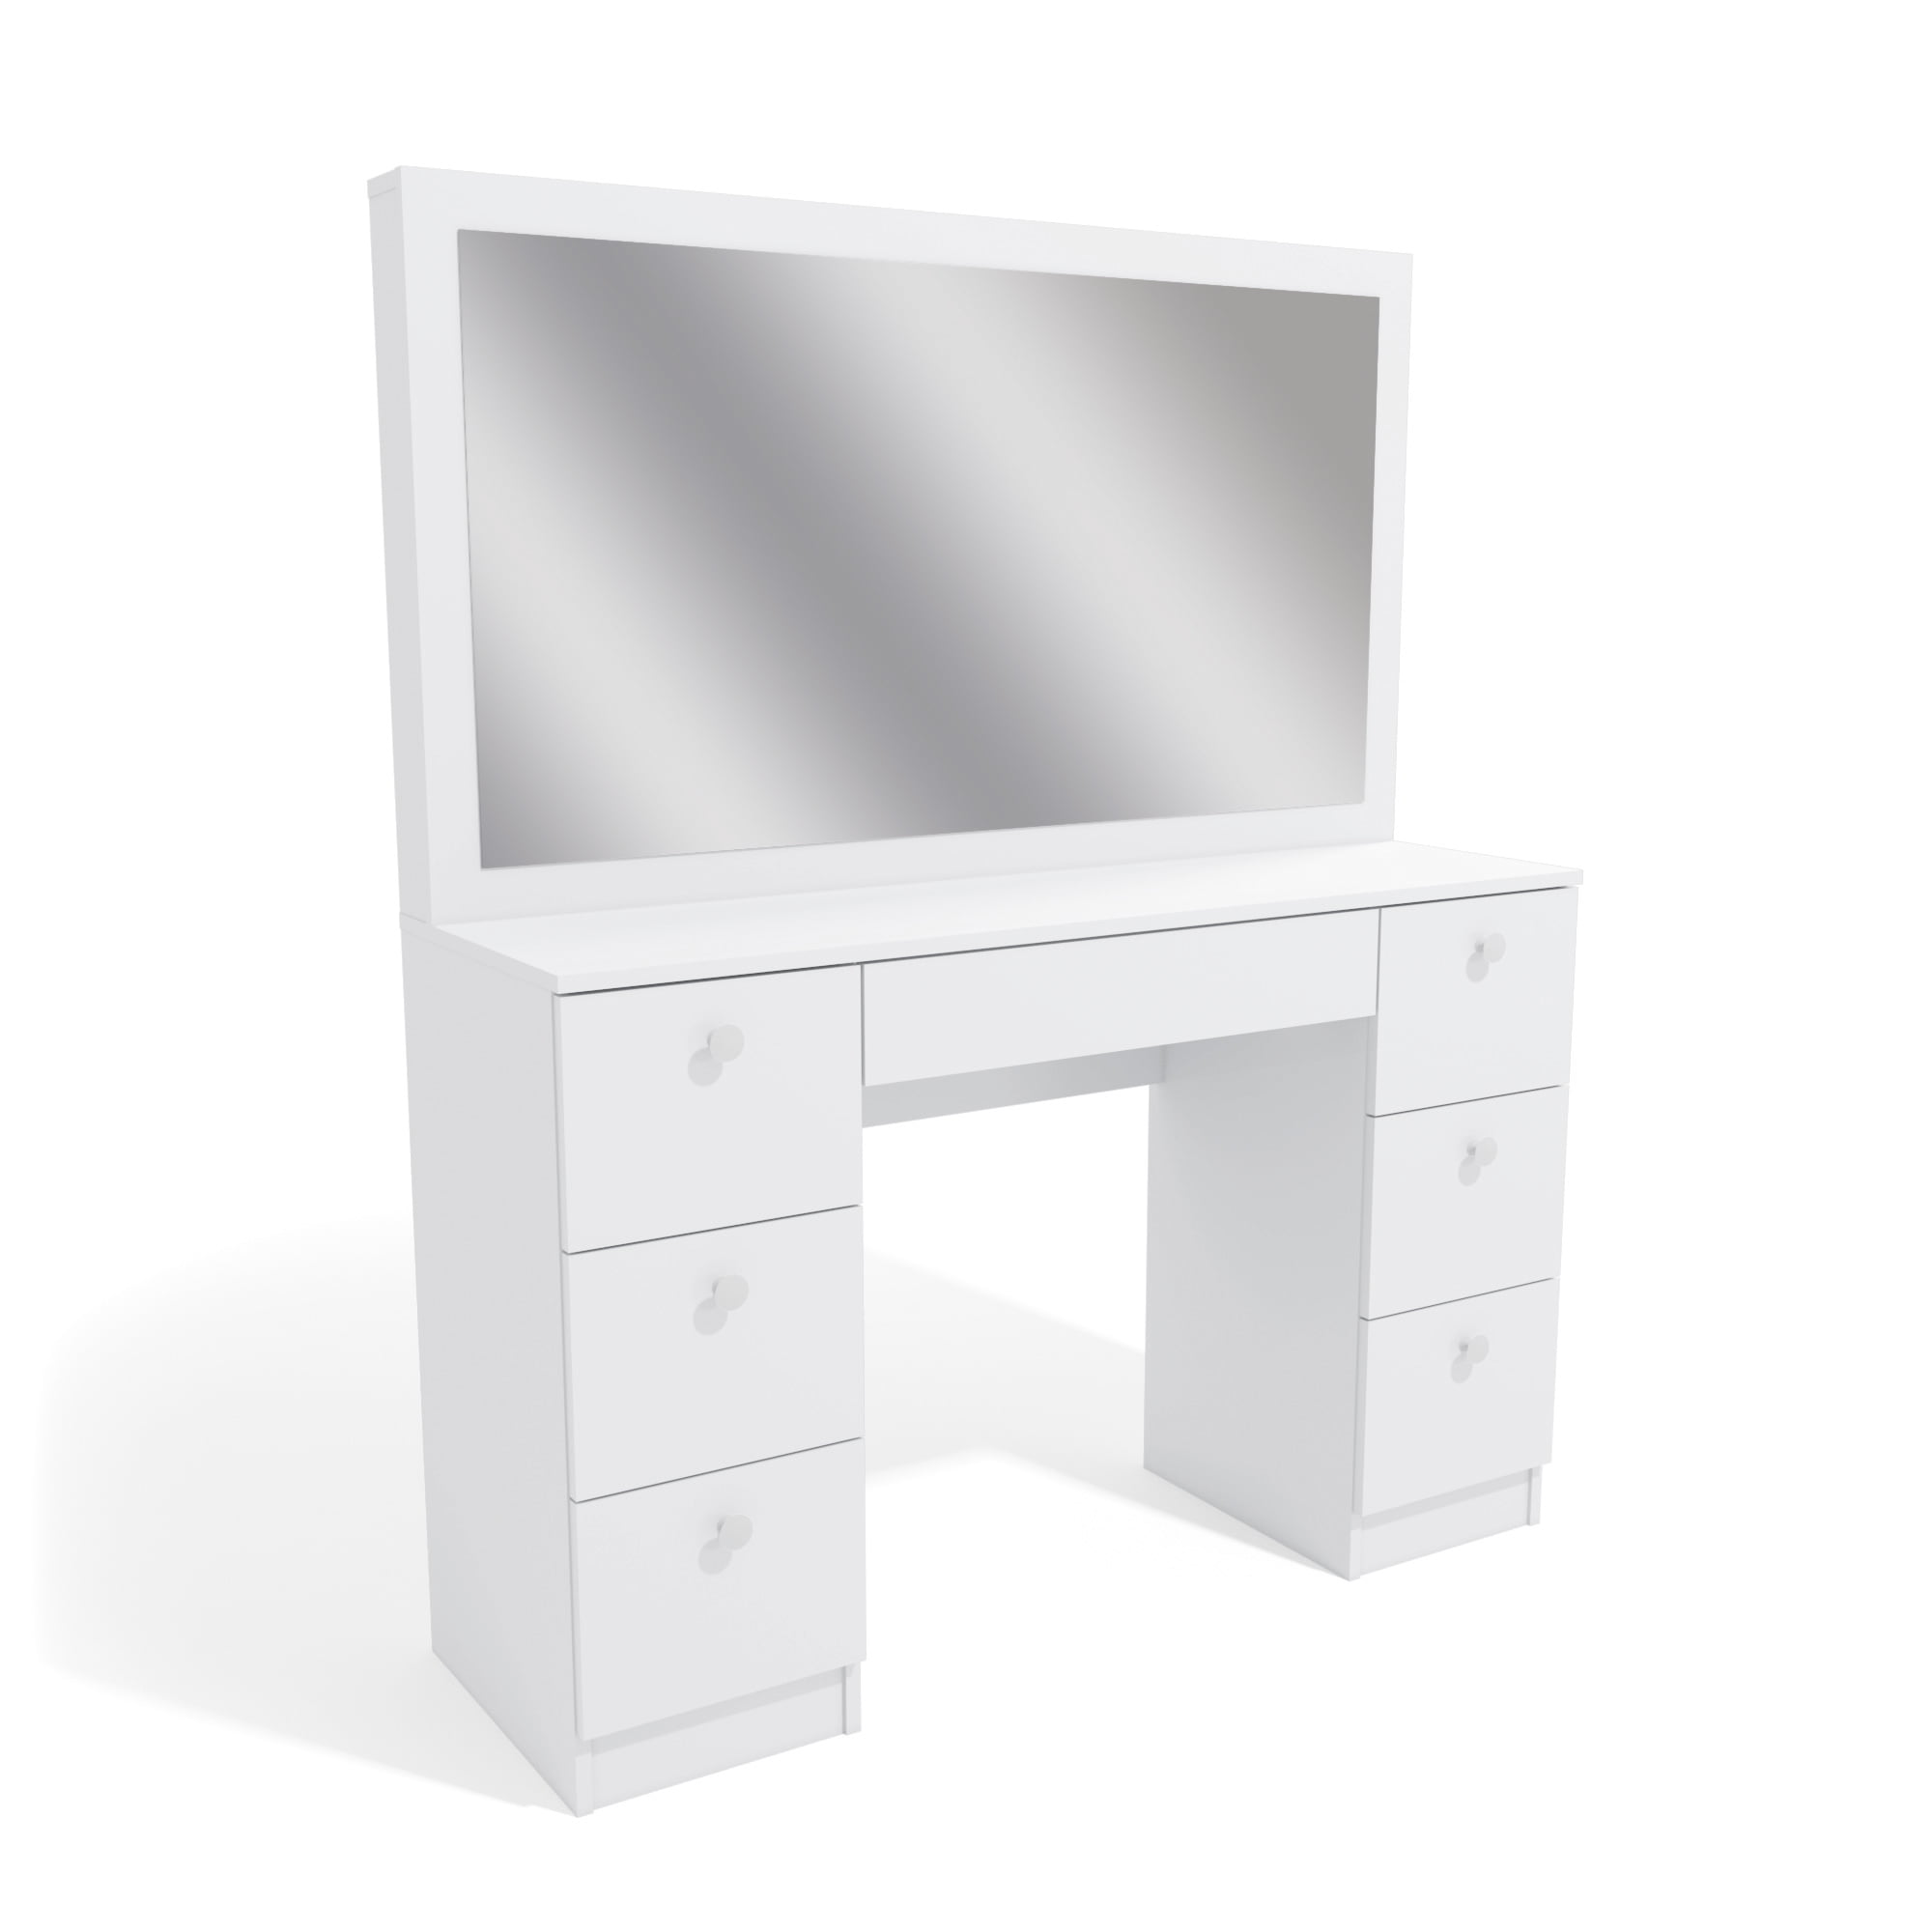 Boahaus Artemisia Modern Vanity, Boahaus Eleanor Modern Vanity Table With Mirror And 3 Drawers White Finish